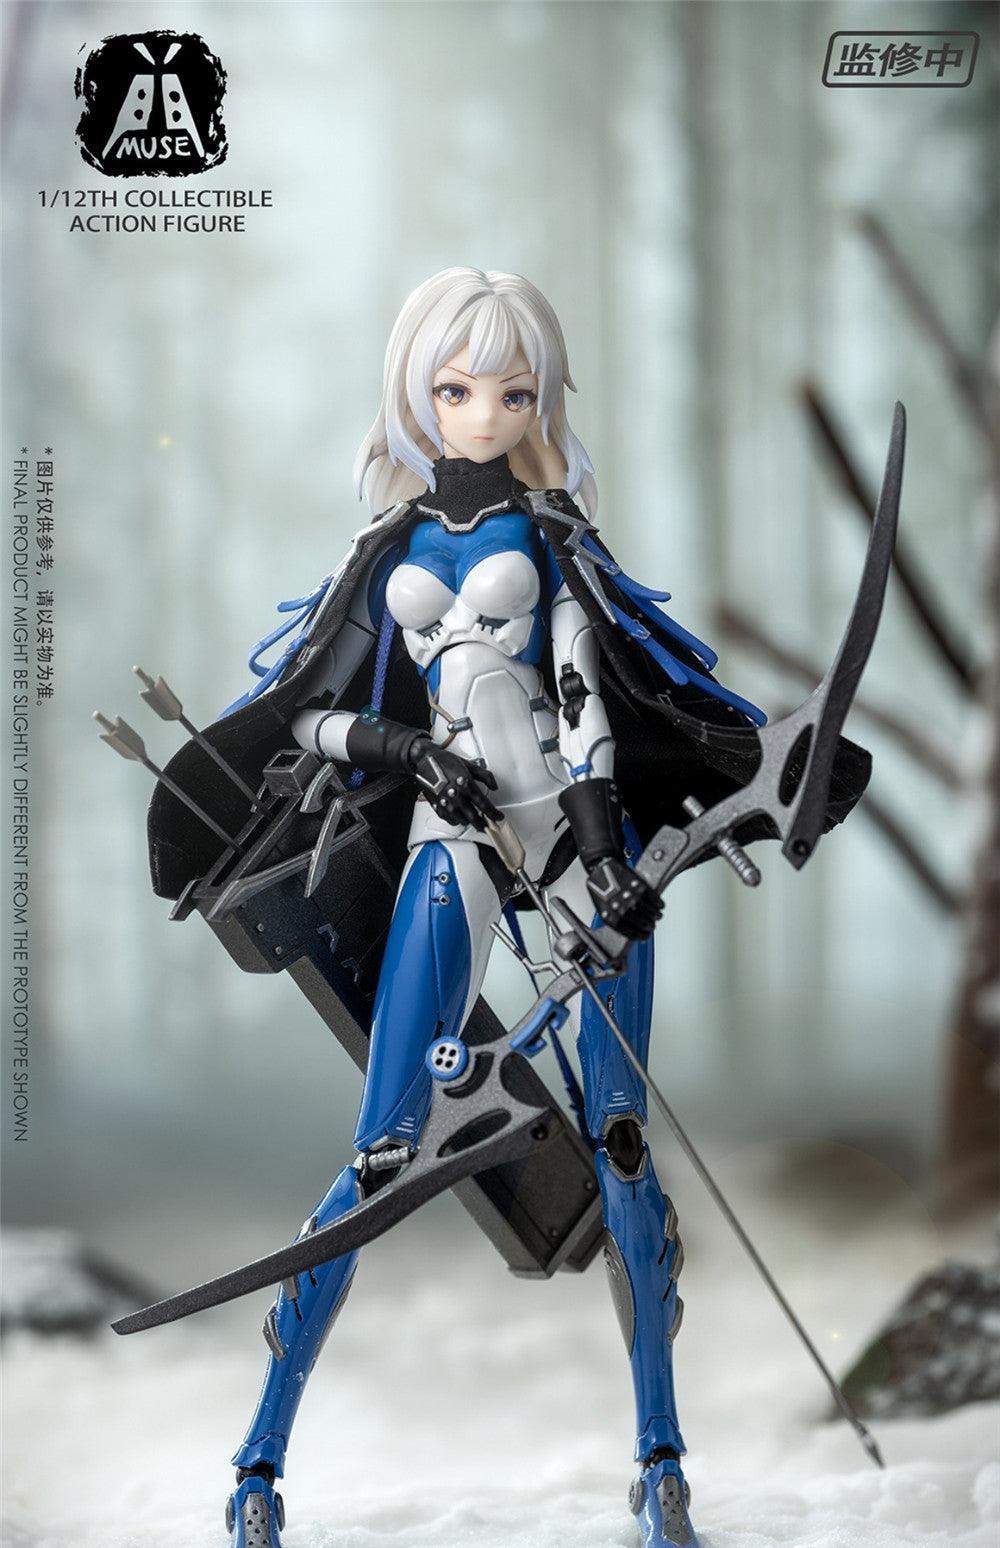 VToys - 1:12 Muse Action Figure